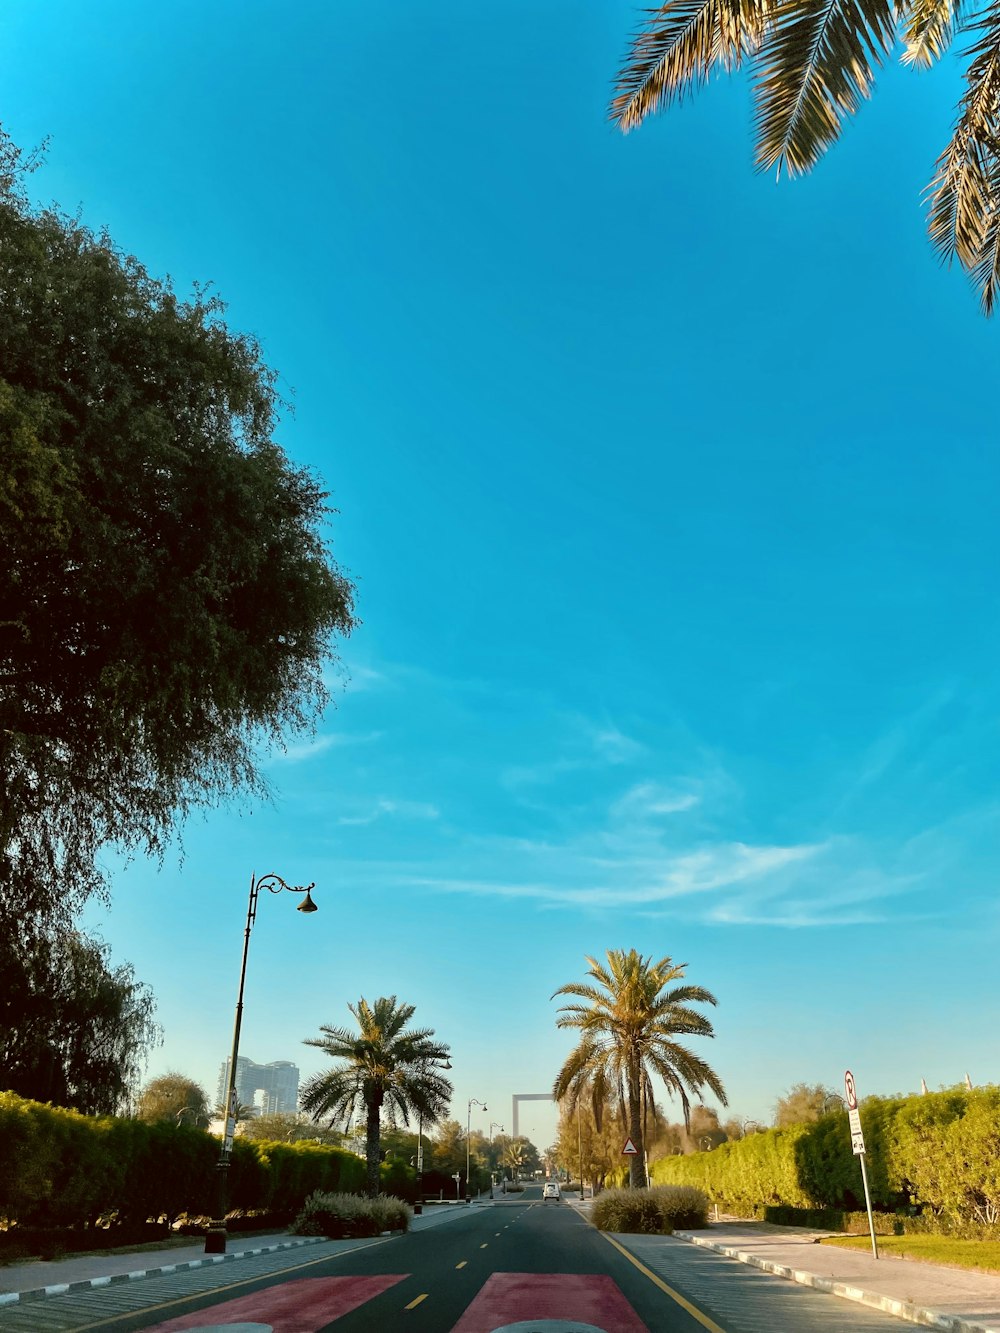 a street with palm trees and a blue sky